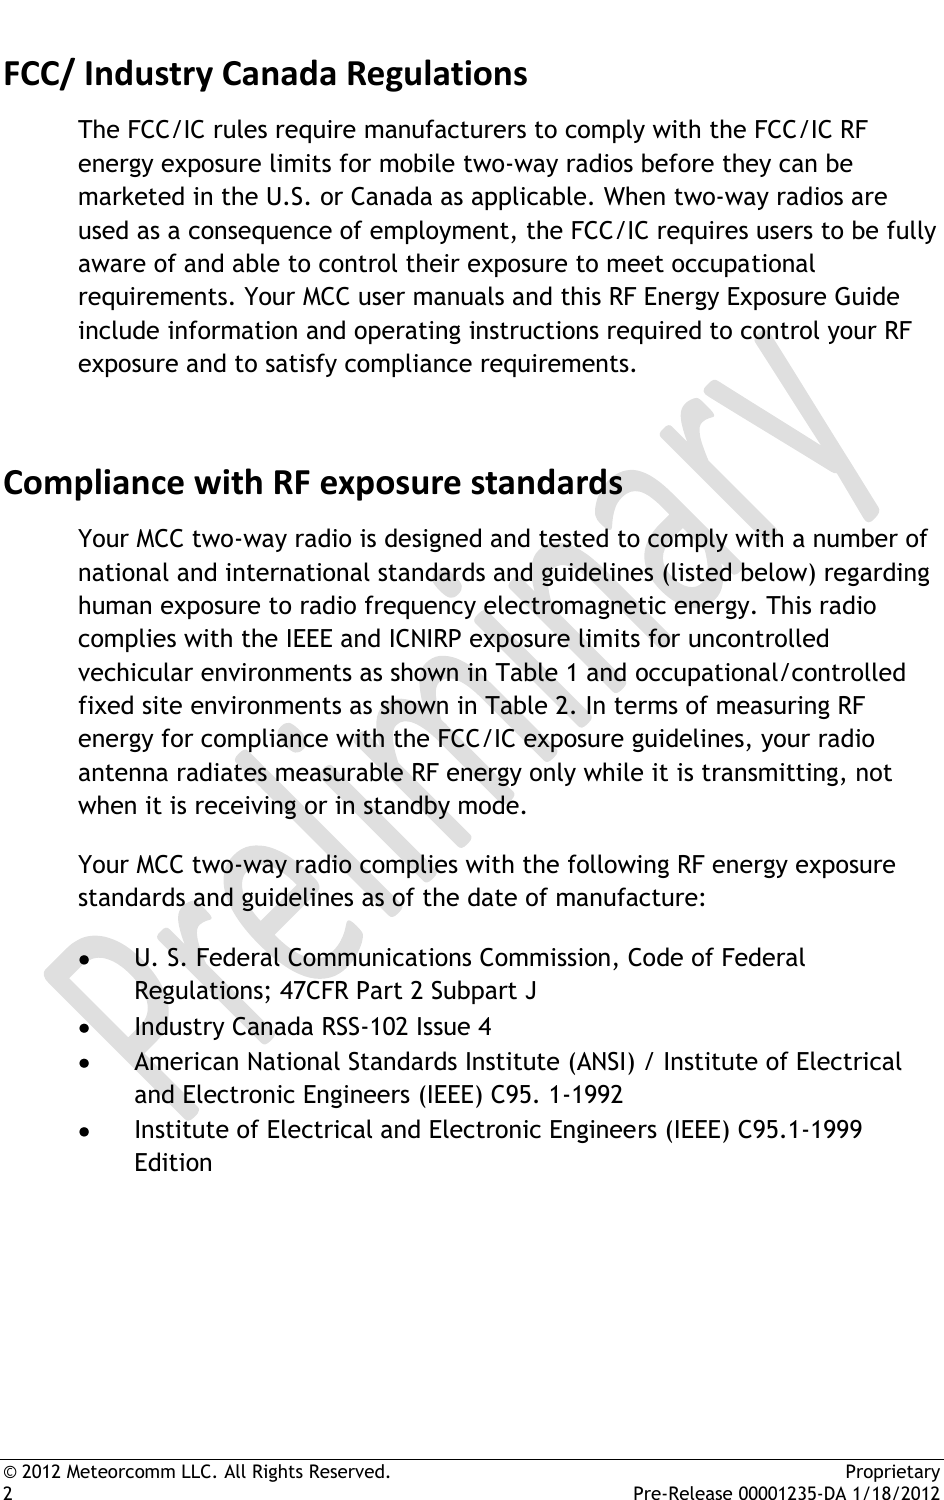  © 2012 Meteorcomm LLC. All Rights Reserved.    Proprietary 2      Pre-Release 00001235-DA 1/18/2012 FCC/ Industry Canada Regulations The FCC/IC rules require manufacturers to comply with the FCC/IC RF energy exposure limits for mobile two-way radios before they can be marketed in the U.S. or Canada as applicable. When two-way radios are used as a consequence of employment, the FCC/IC requires users to be fully aware of and able to control their exposure to meet occupational requirements. Your MCC user manuals and this RF Energy Exposure Guide include information and operating instructions required to control your RF exposure and to satisfy compliance requirements. Compliance with RF exposure standards Your MCC two-way radio is designed and tested to comply with a number of national and international standards and guidelines (listed below) regarding human exposure to radio frequency electromagnetic energy. This radio complies with the IEEE and ICNIRP exposure limits for uncontrolled vechicular environments as shown in Table 1 and occupational/controlled fixed site environments as shown in Table 2. In terms of measuring RF energy for compliance with the FCC/IC exposure guidelines, your radio antenna radiates measurable RF energy only while it is transmitting, not when it is receiving or in standby mode. Your MCC two-way radio complies with the following RF energy exposure standards and guidelines as of the date of manufacture:  U. S. Federal Communications Commission, Code of Federal Regulations; 47CFR Part 2 Subpart J  Industry Canada RSS-102 Issue 4  American National Standards Institute (ANSI) / Institute of Electrical and Electronic Engineers (IEEE) C95. 1-1992  Institute of Electrical and Electronic Engineers (IEEE) C95.1-1999 Edition    